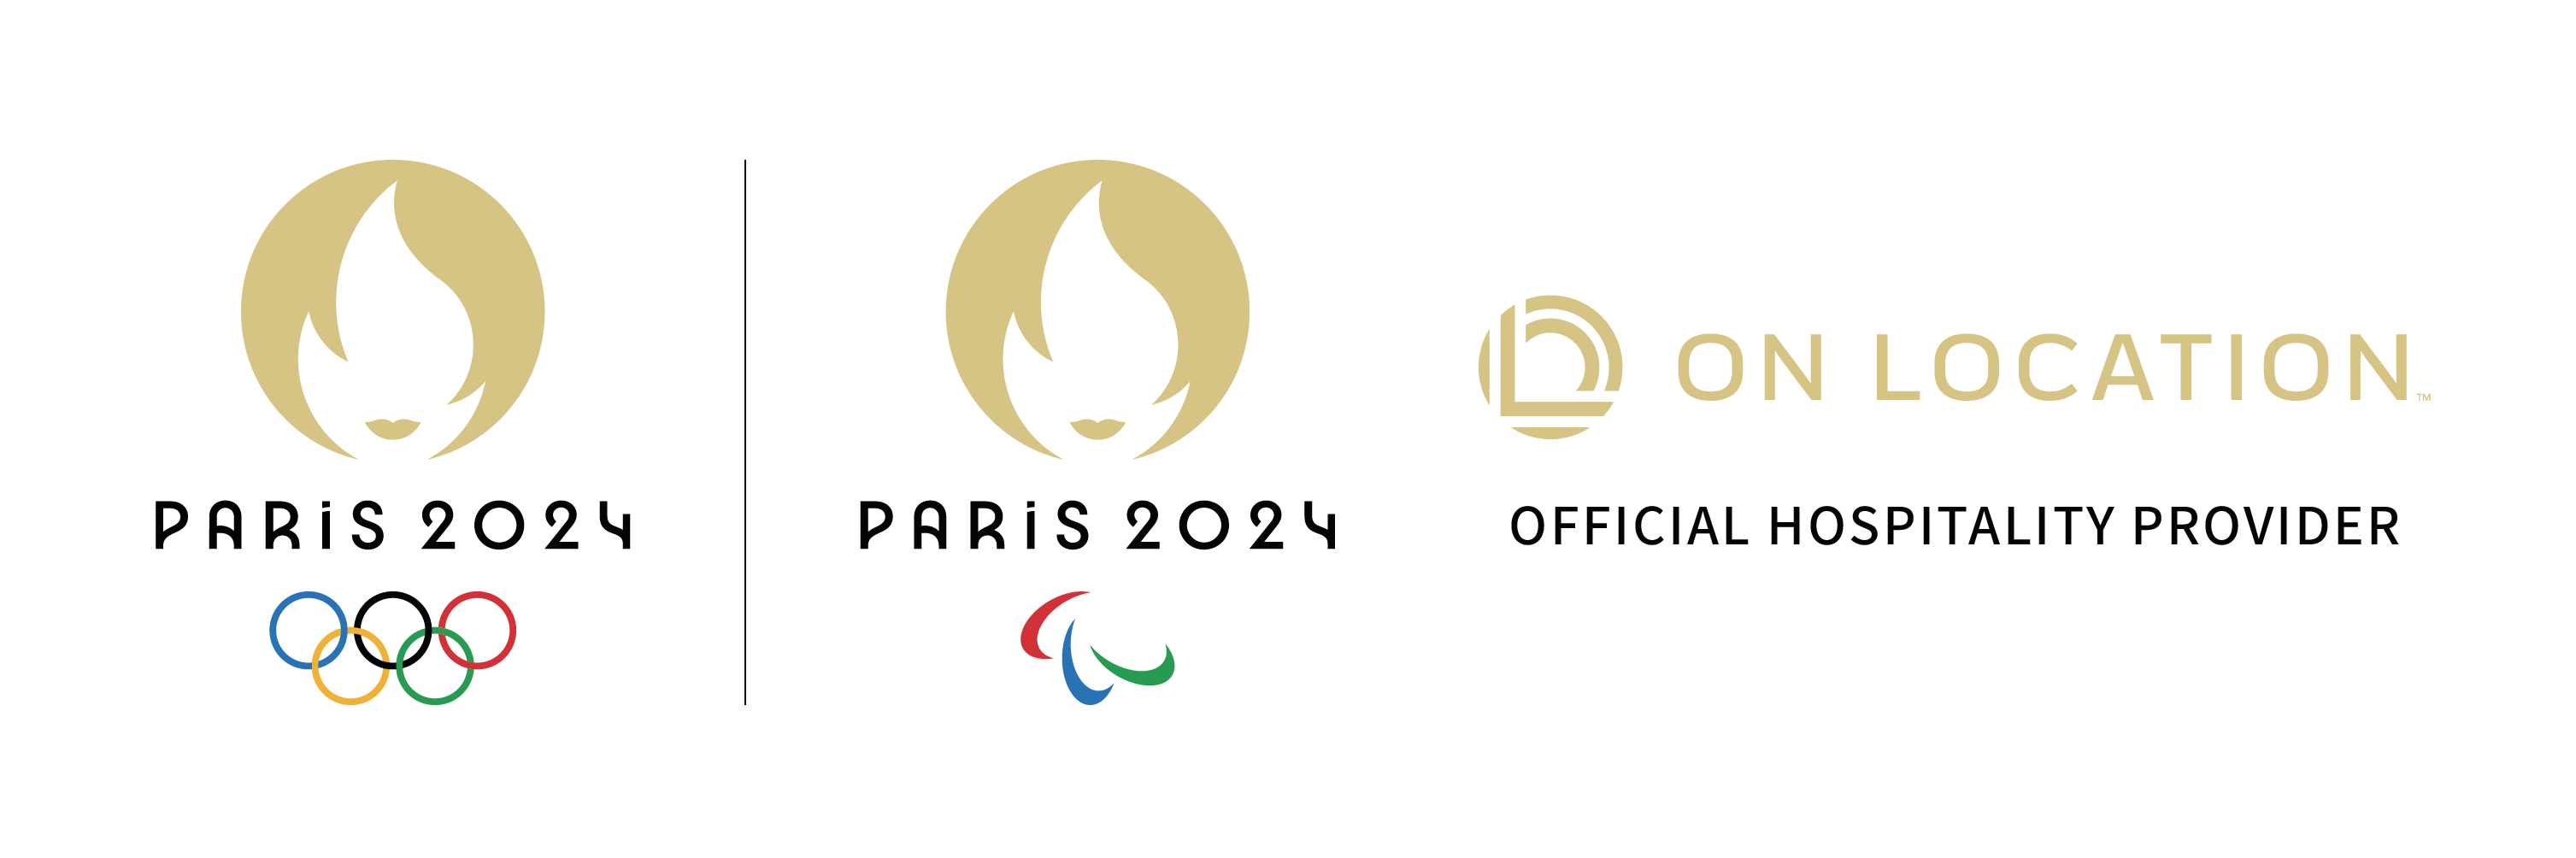 OLYMPIC GAMES PARIS 2024 HOSPITALITY PACKAGES ENQUIRY On Location